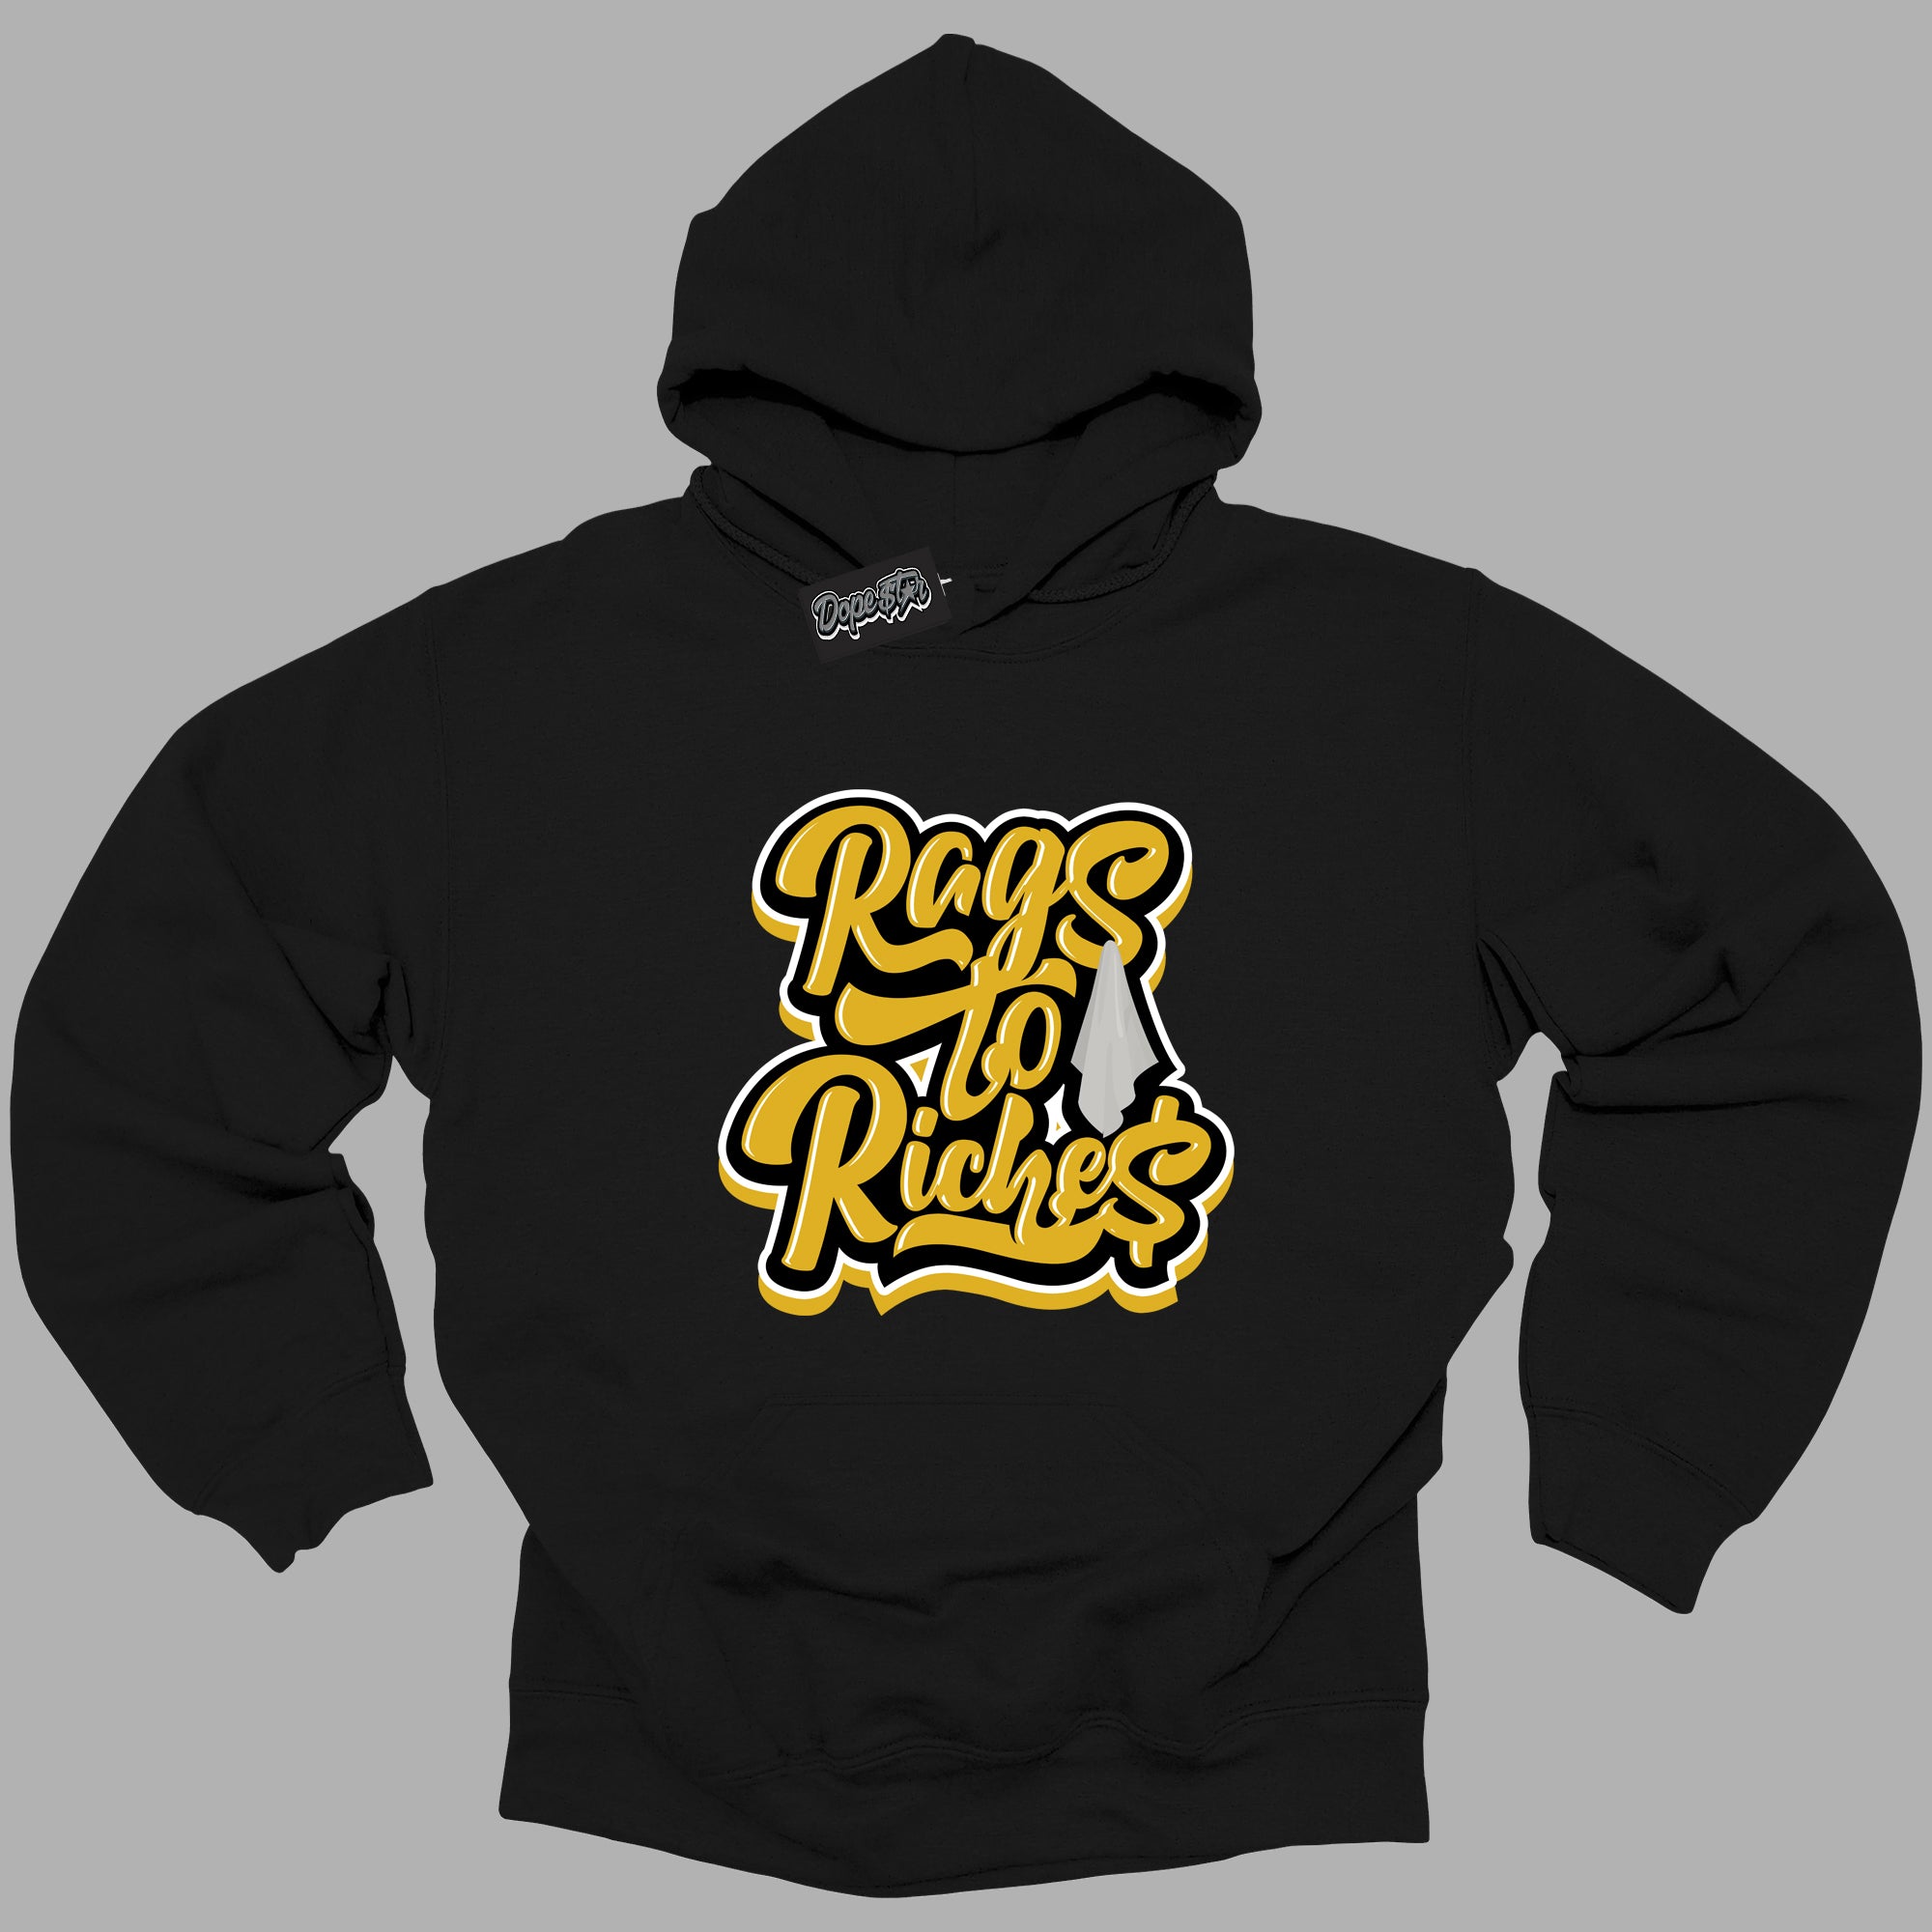 Cool Black Hoodie with “ Rags To Riches ”  design that Perfectly Matches Yellow Ochre 6s Sneakers.